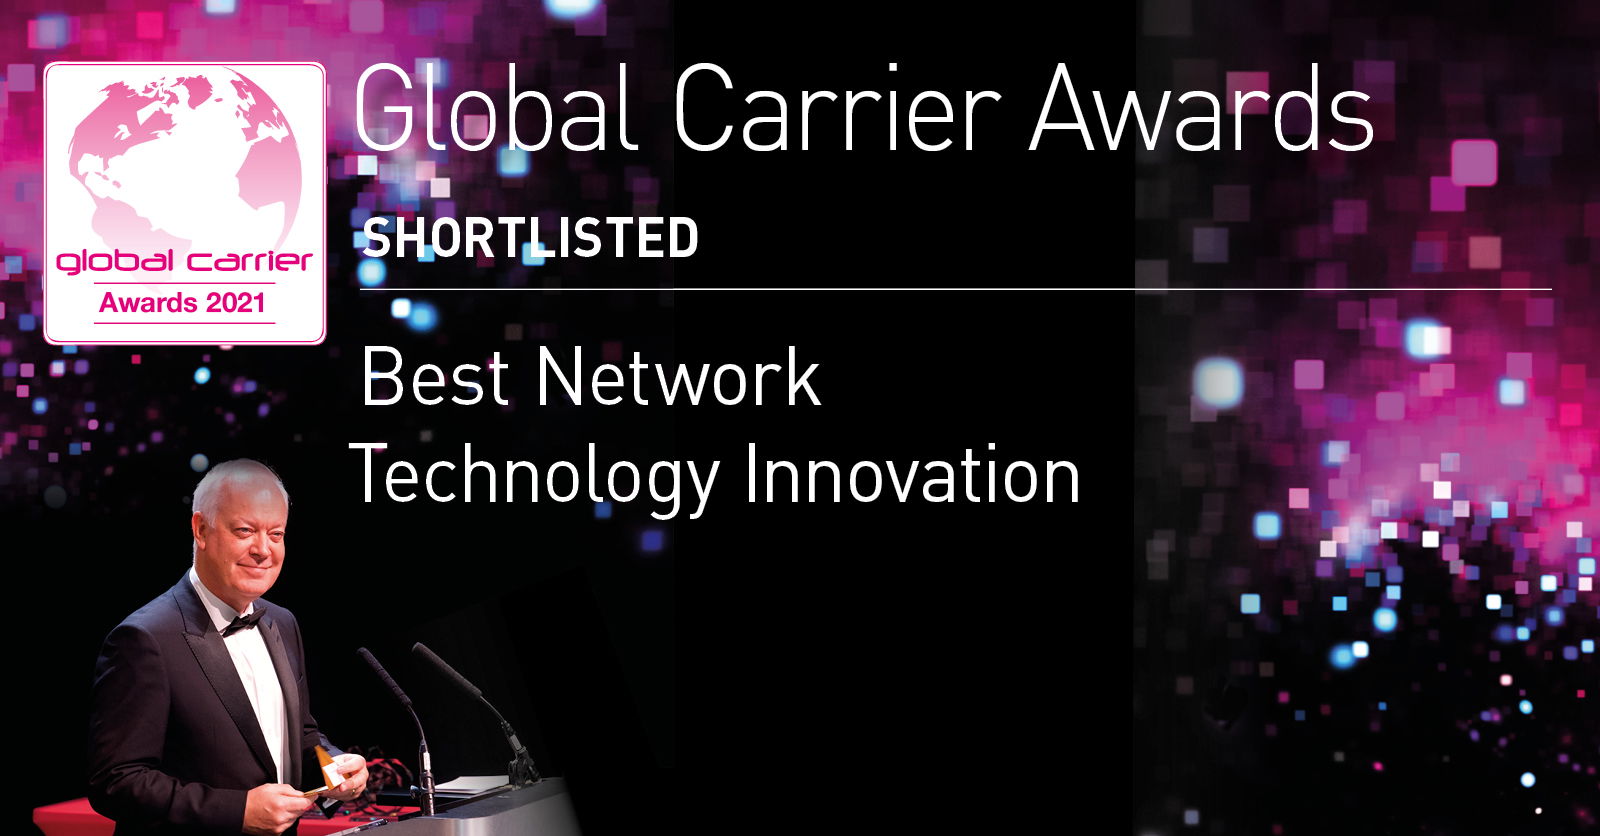 RtBrick shortlisted for Best Network Technology Innovation at the Global Carrier Awards